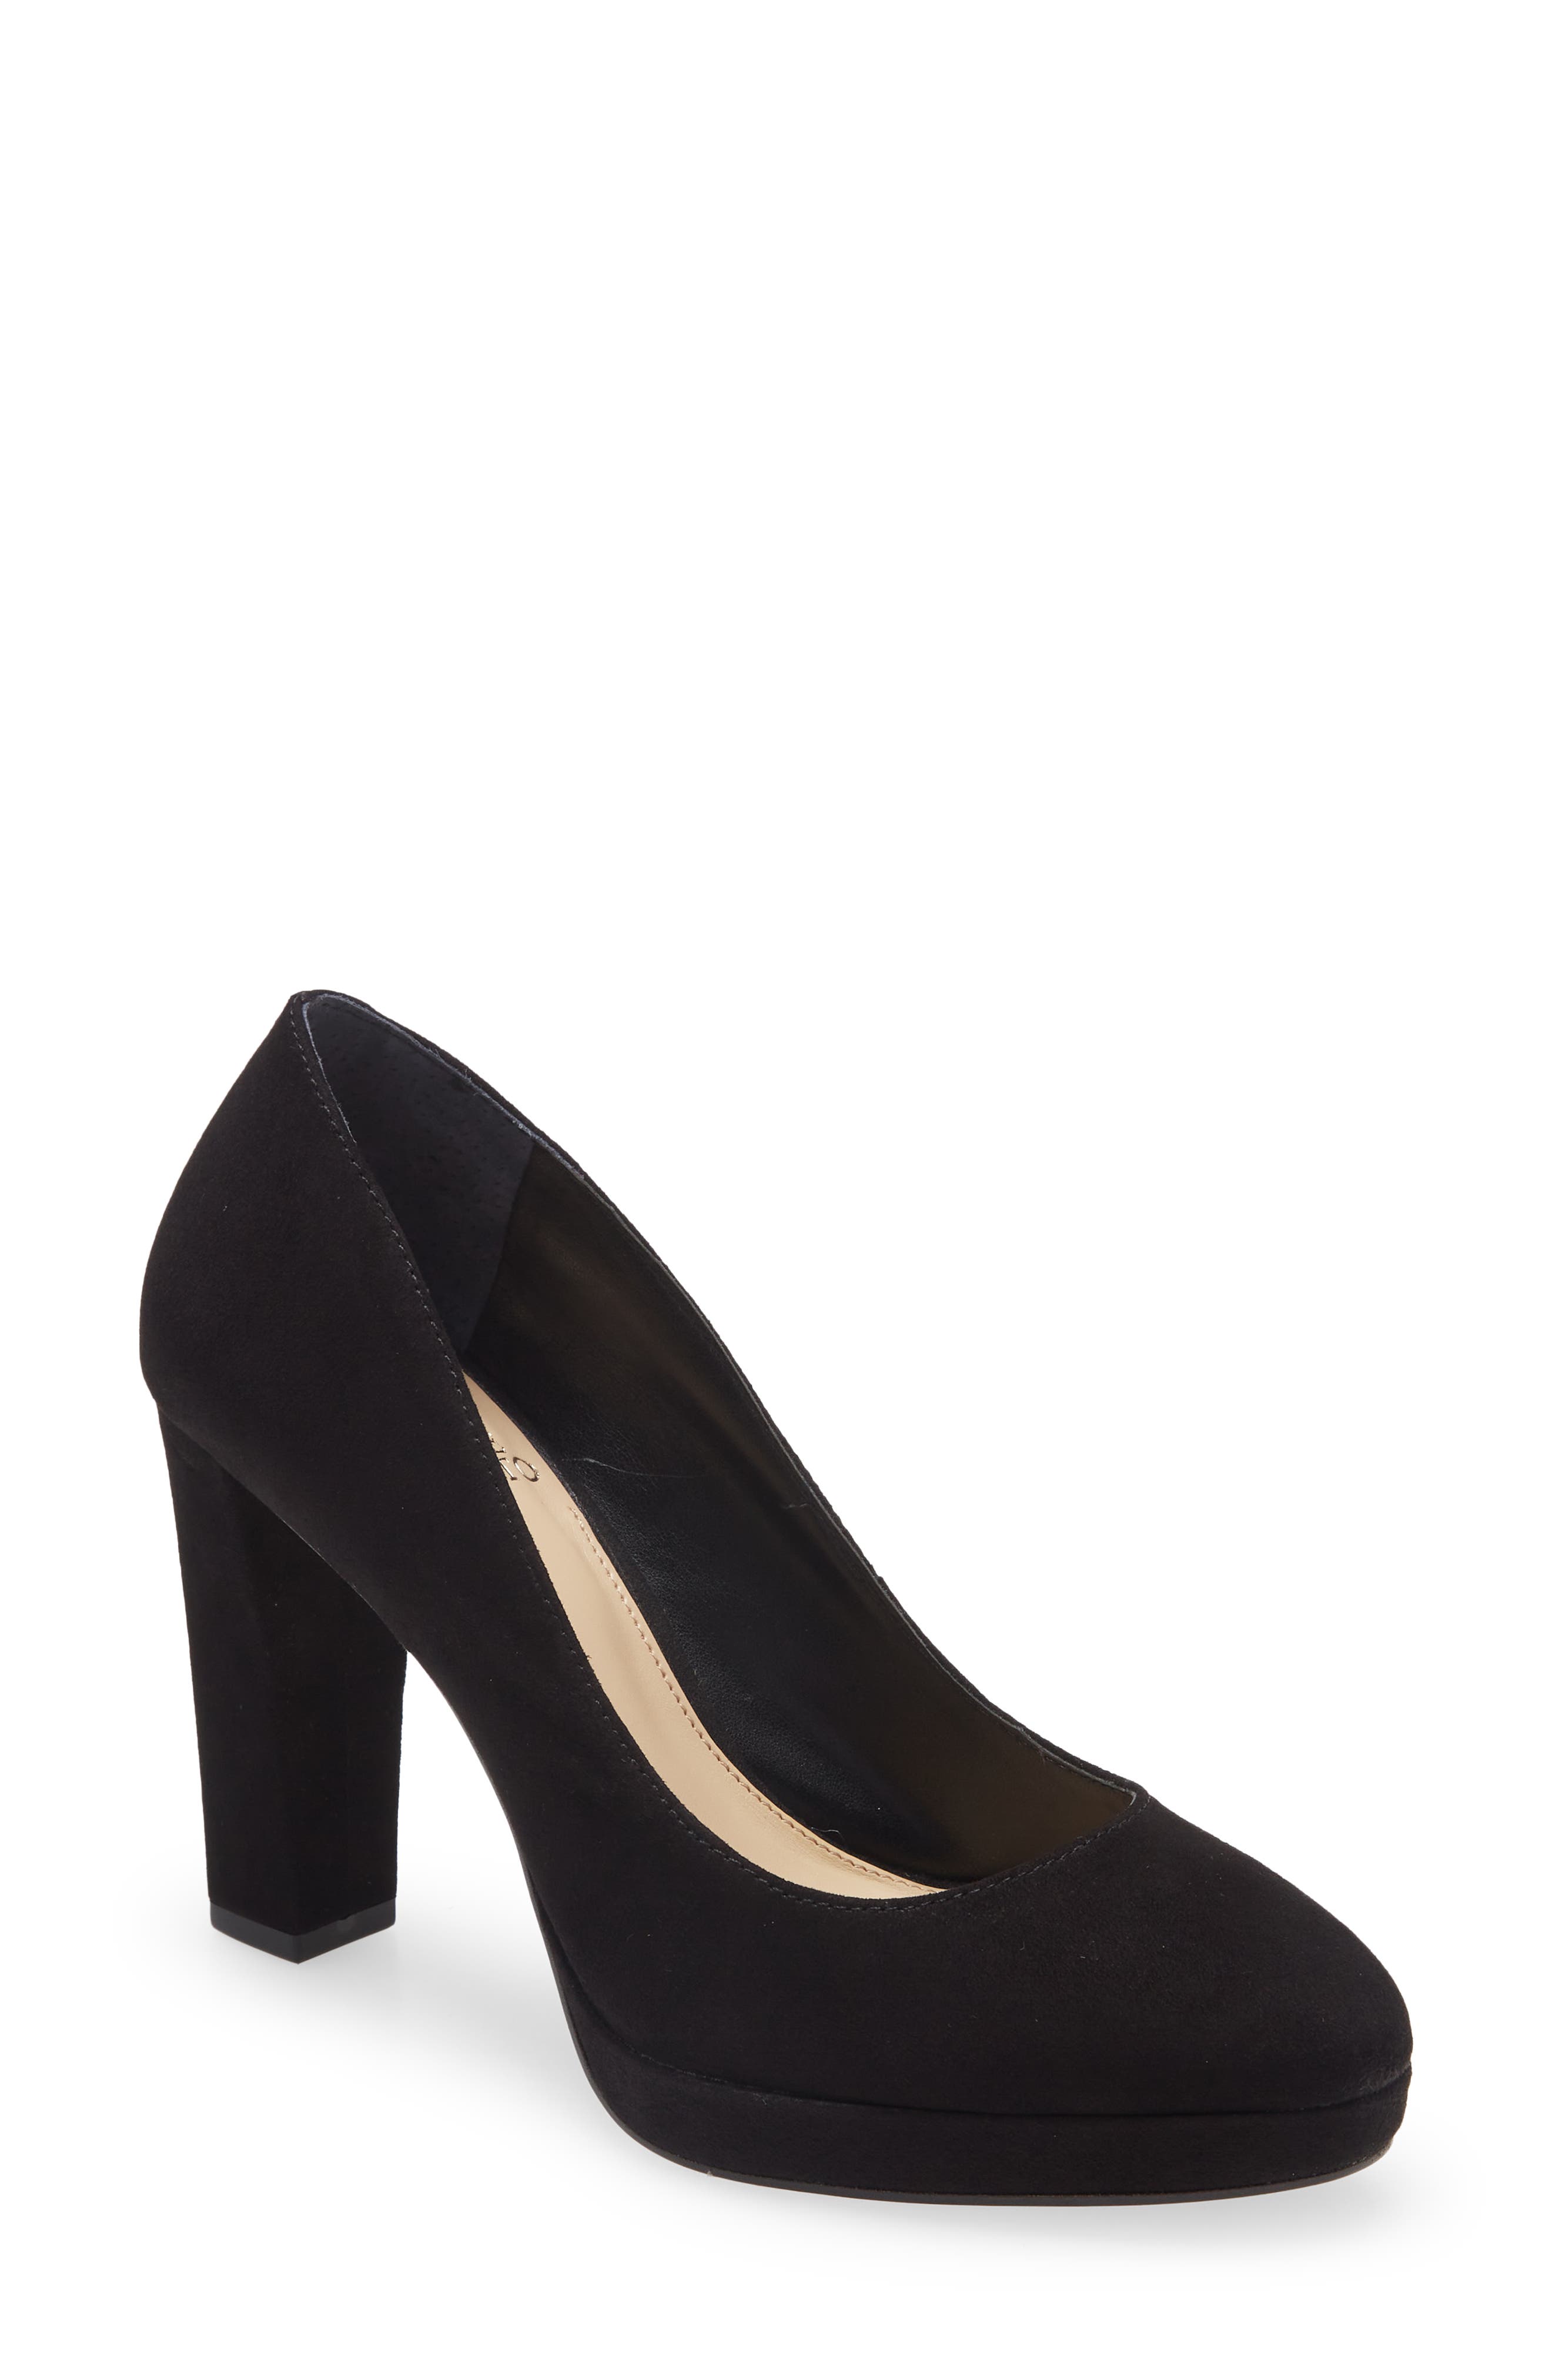 UPC 191707345546 product image for Vince Camuto Halria Pump in Black True Suede at Nordstrom, Size 8 | upcitemdb.com